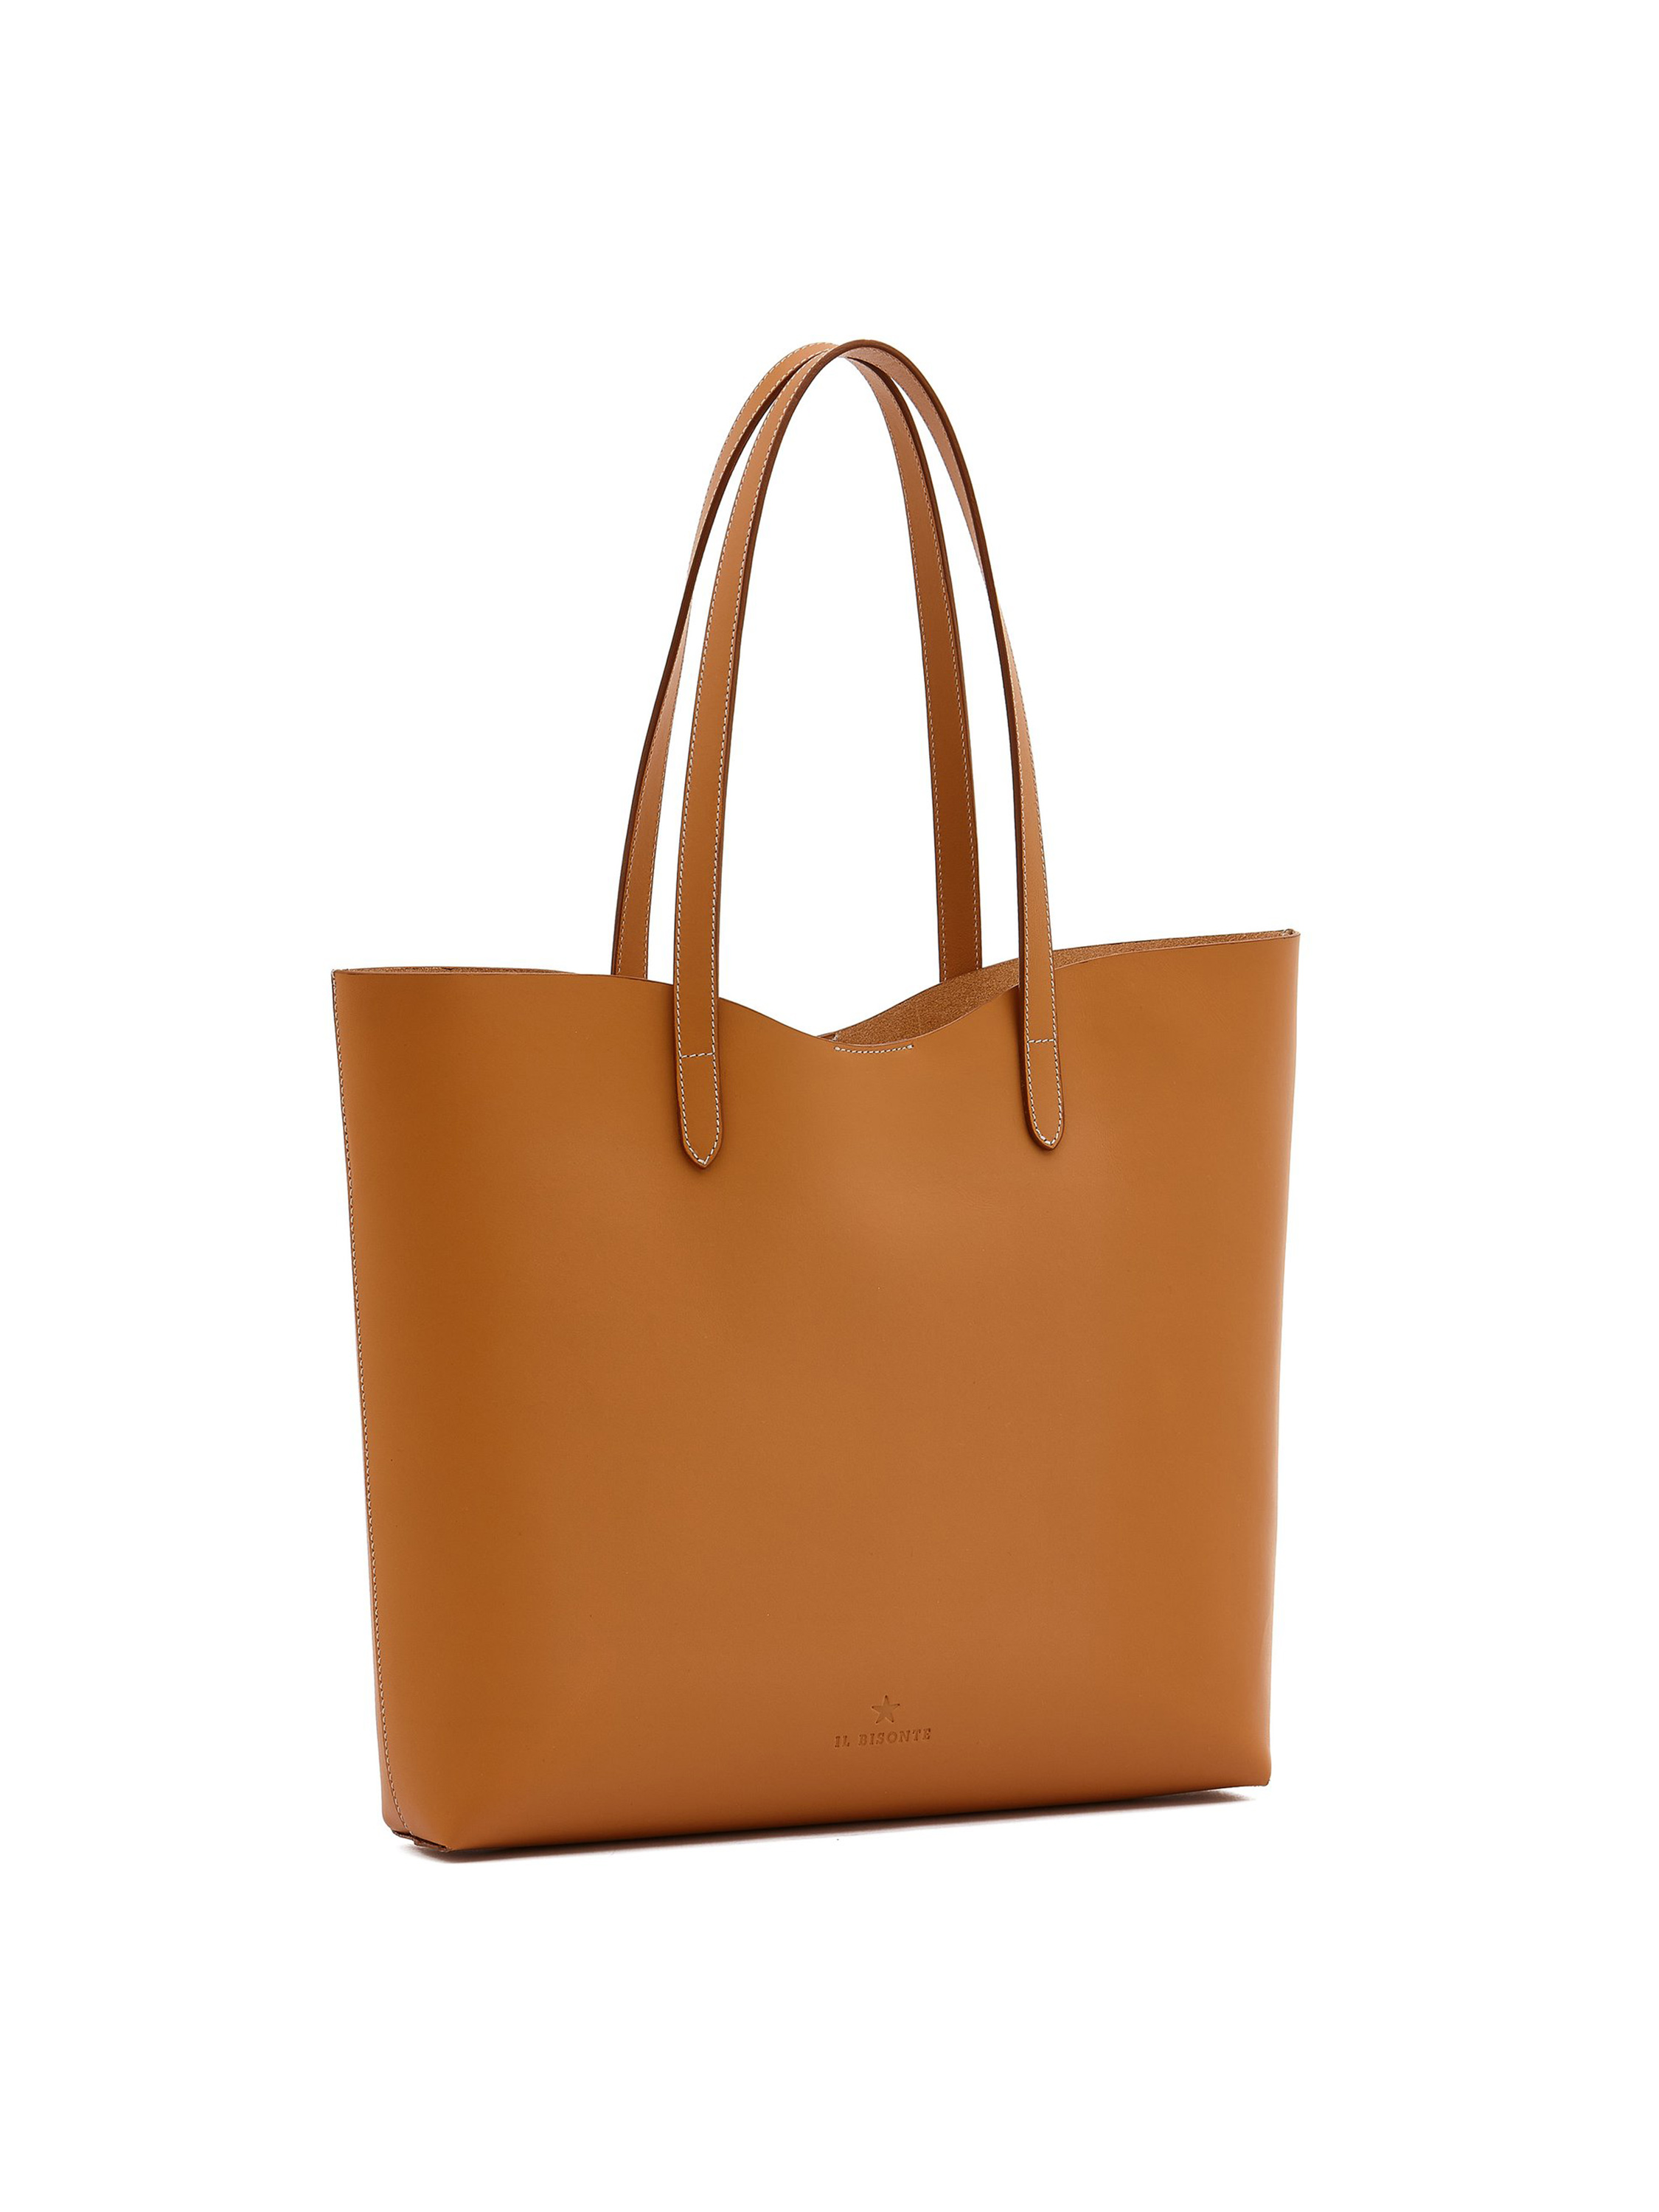 Il Bisonte - Large Leather Handle Tote Bag | NIC+ZOE